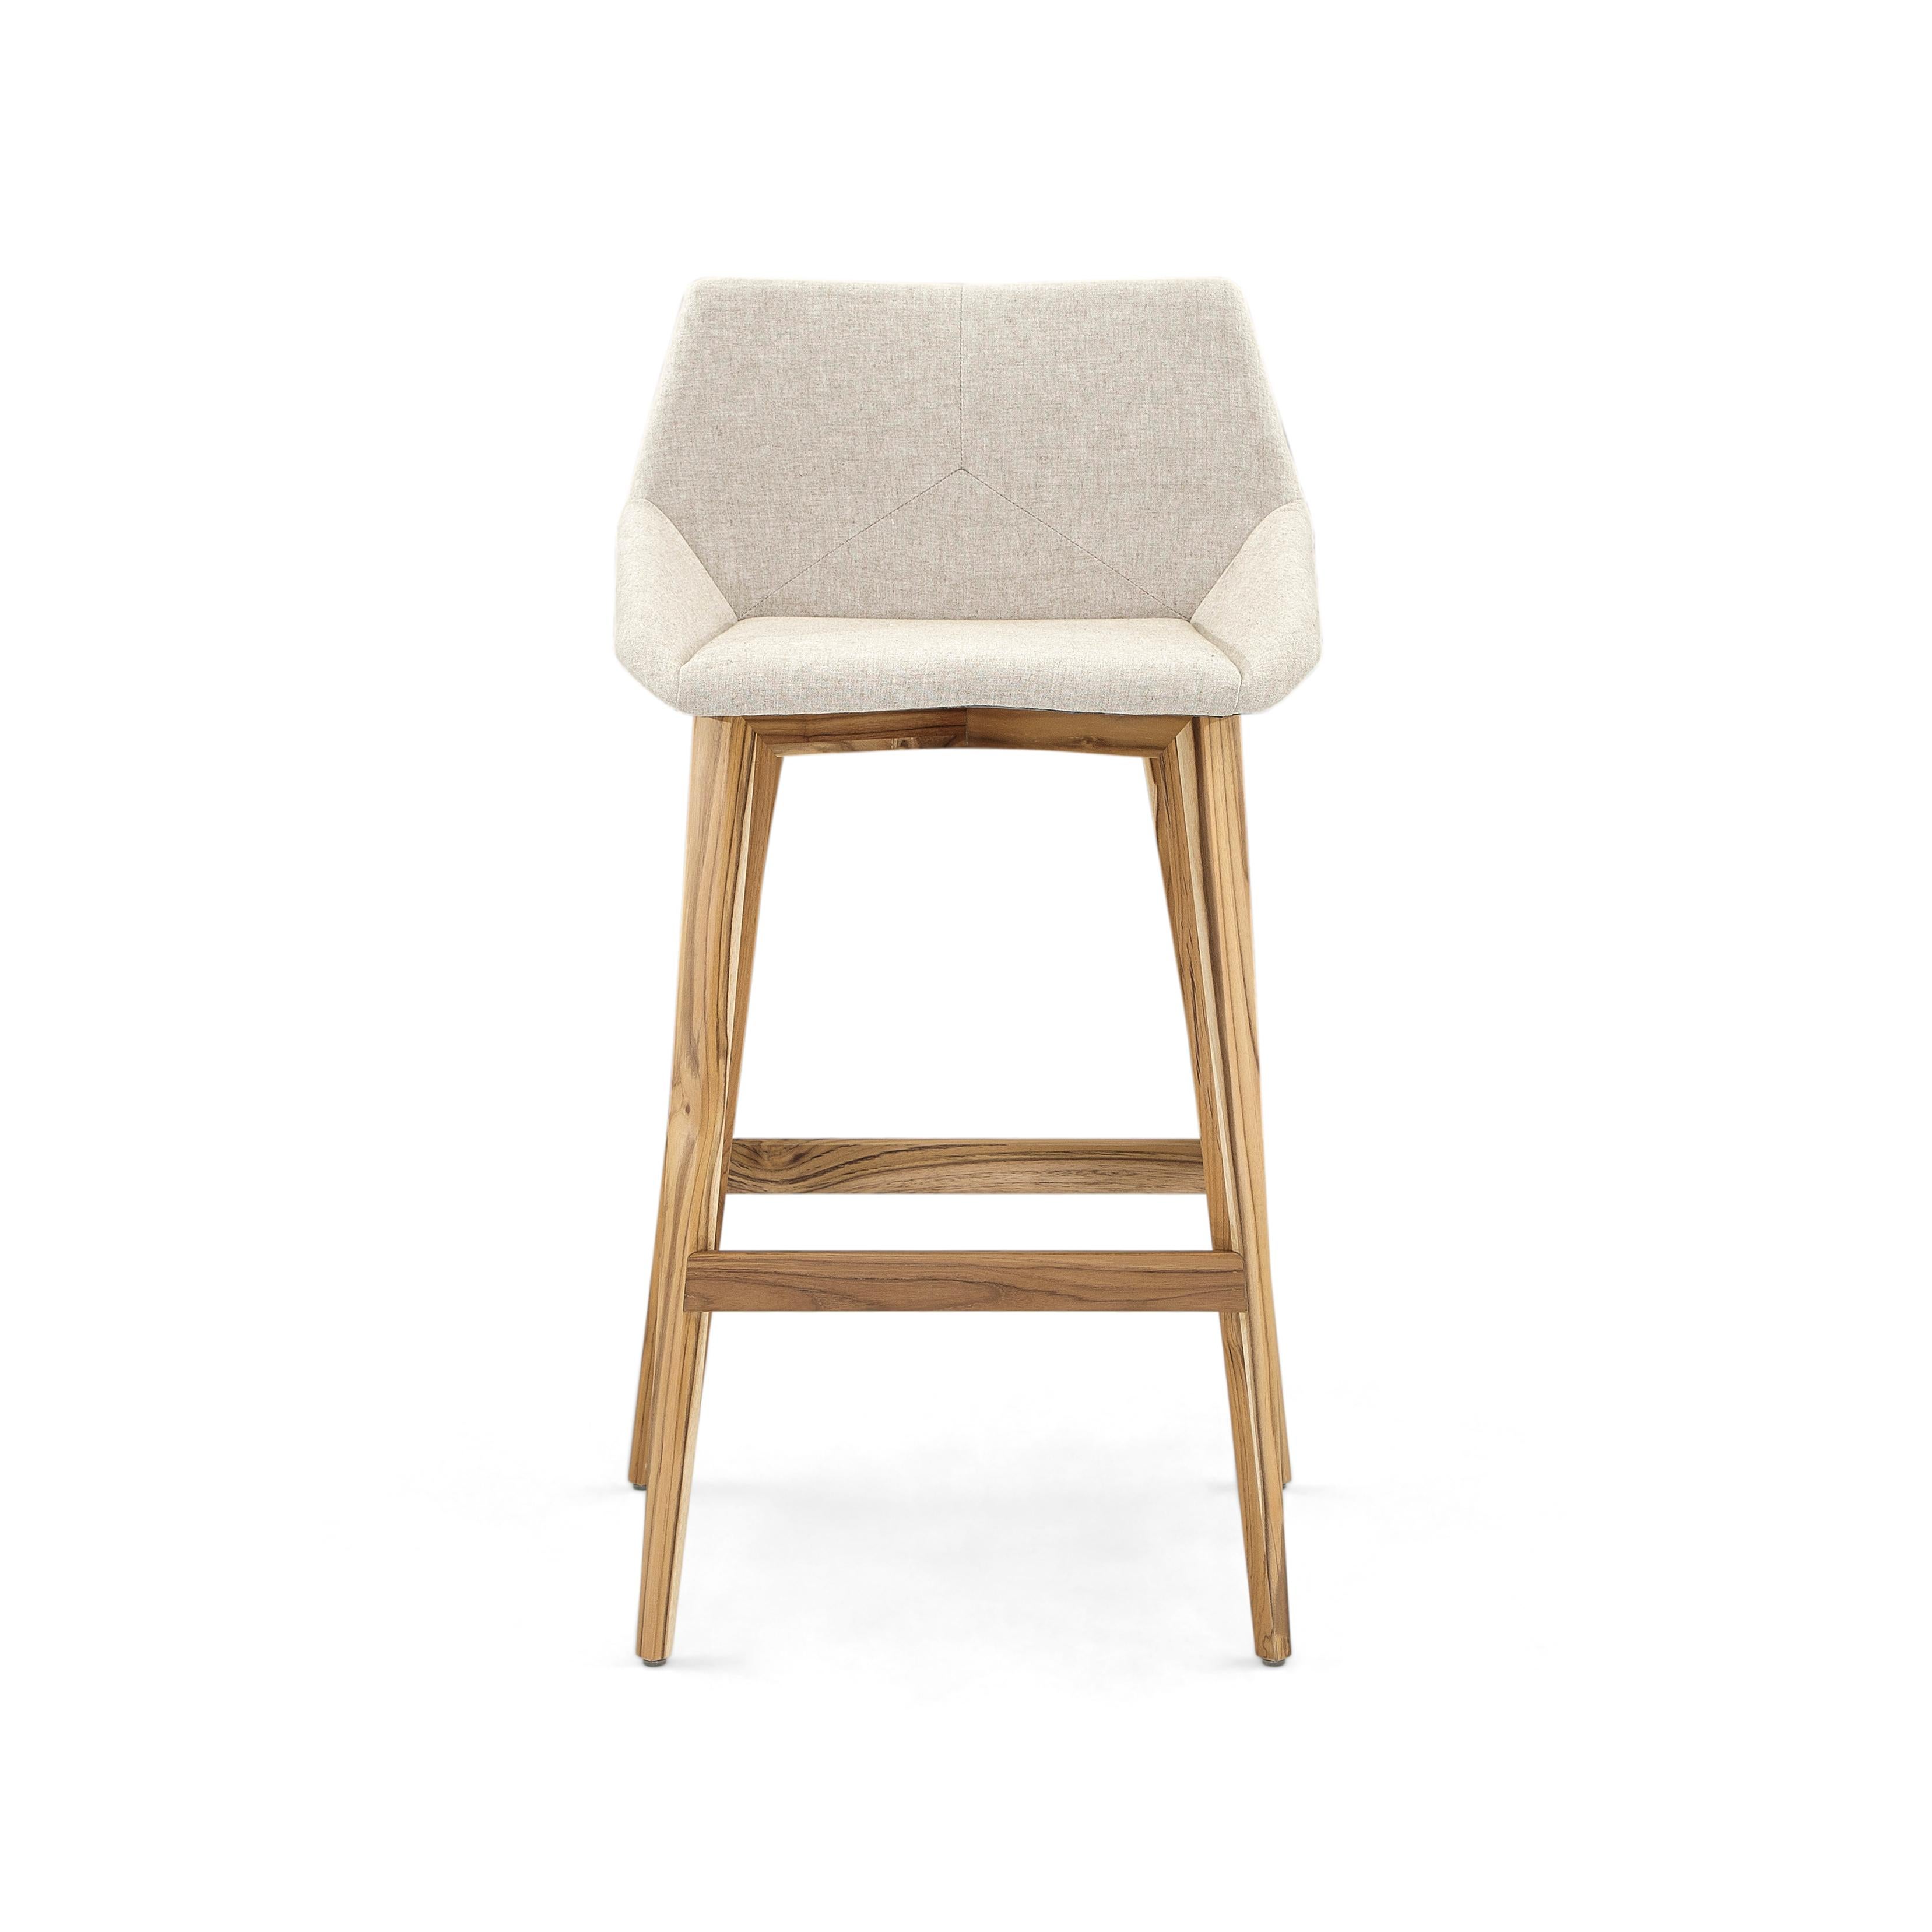 The geometric counter stool as the name says has geometric shapes and pure lines with its teak wooden legs with the seat all wrapped in a beautiful and soft beige fabric. All of these small details thought by architects and designers by our Uultis